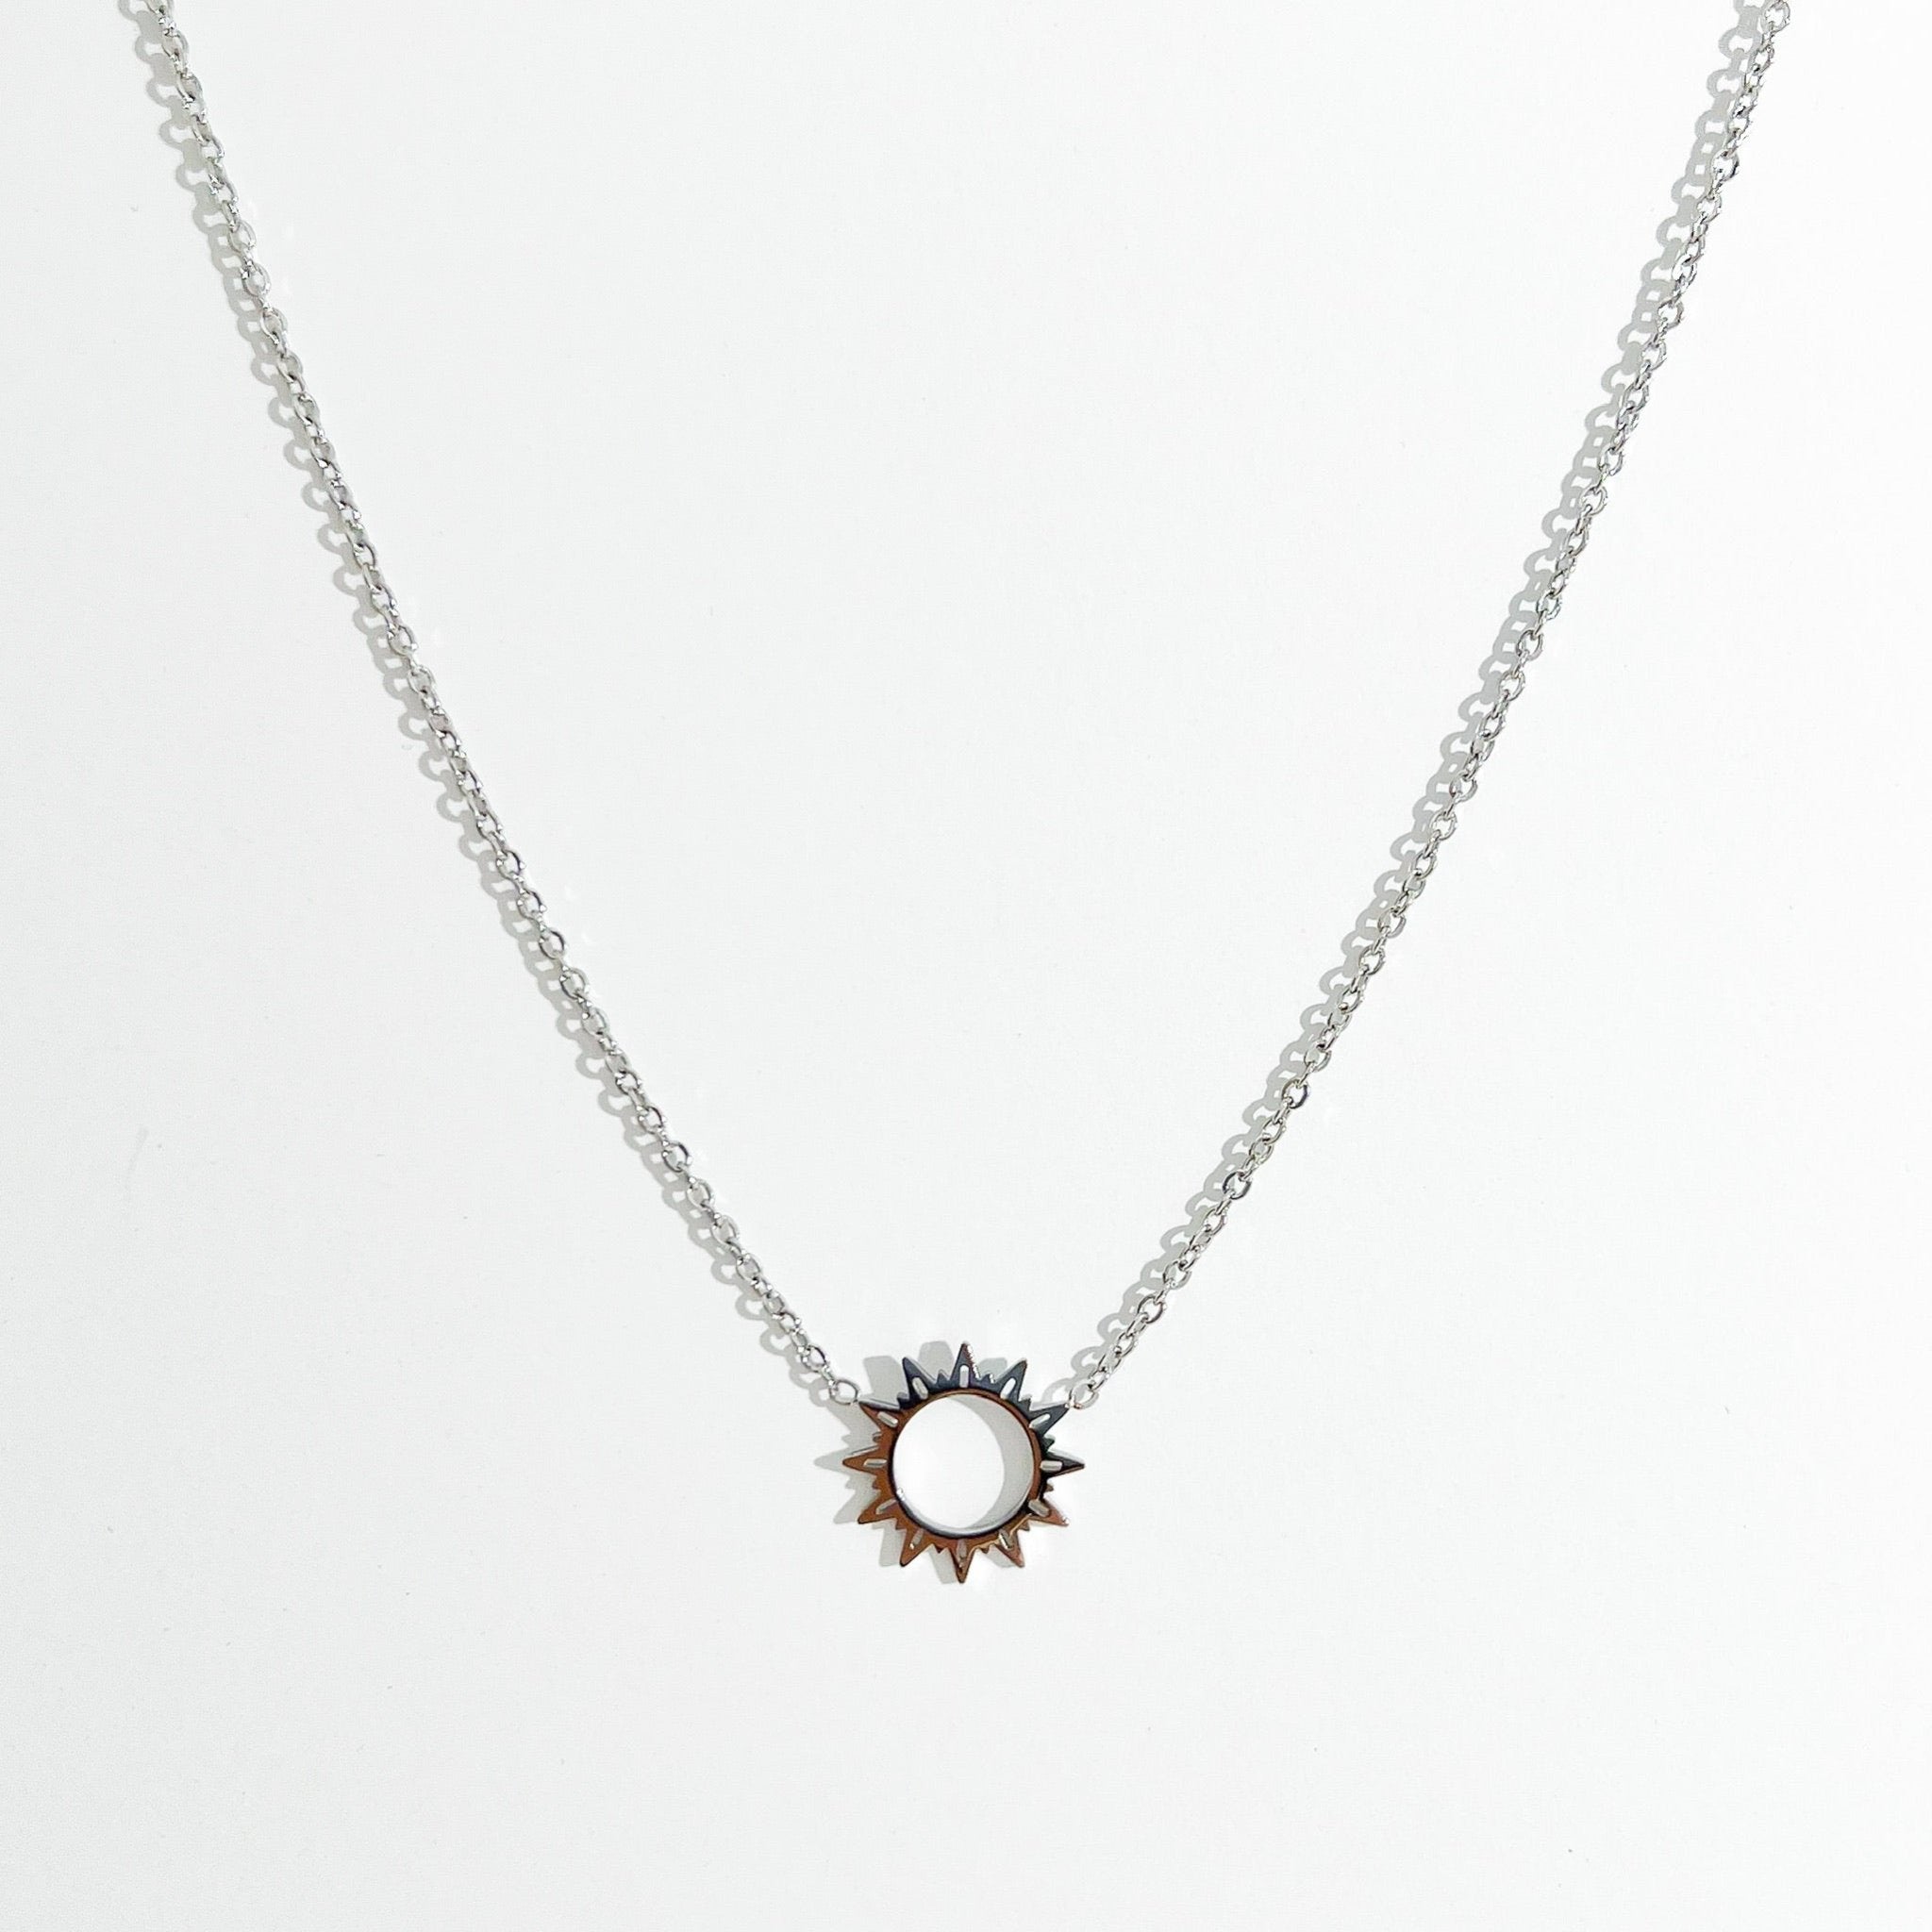 Sunburst Necklace in Silver - Flaire & Co.